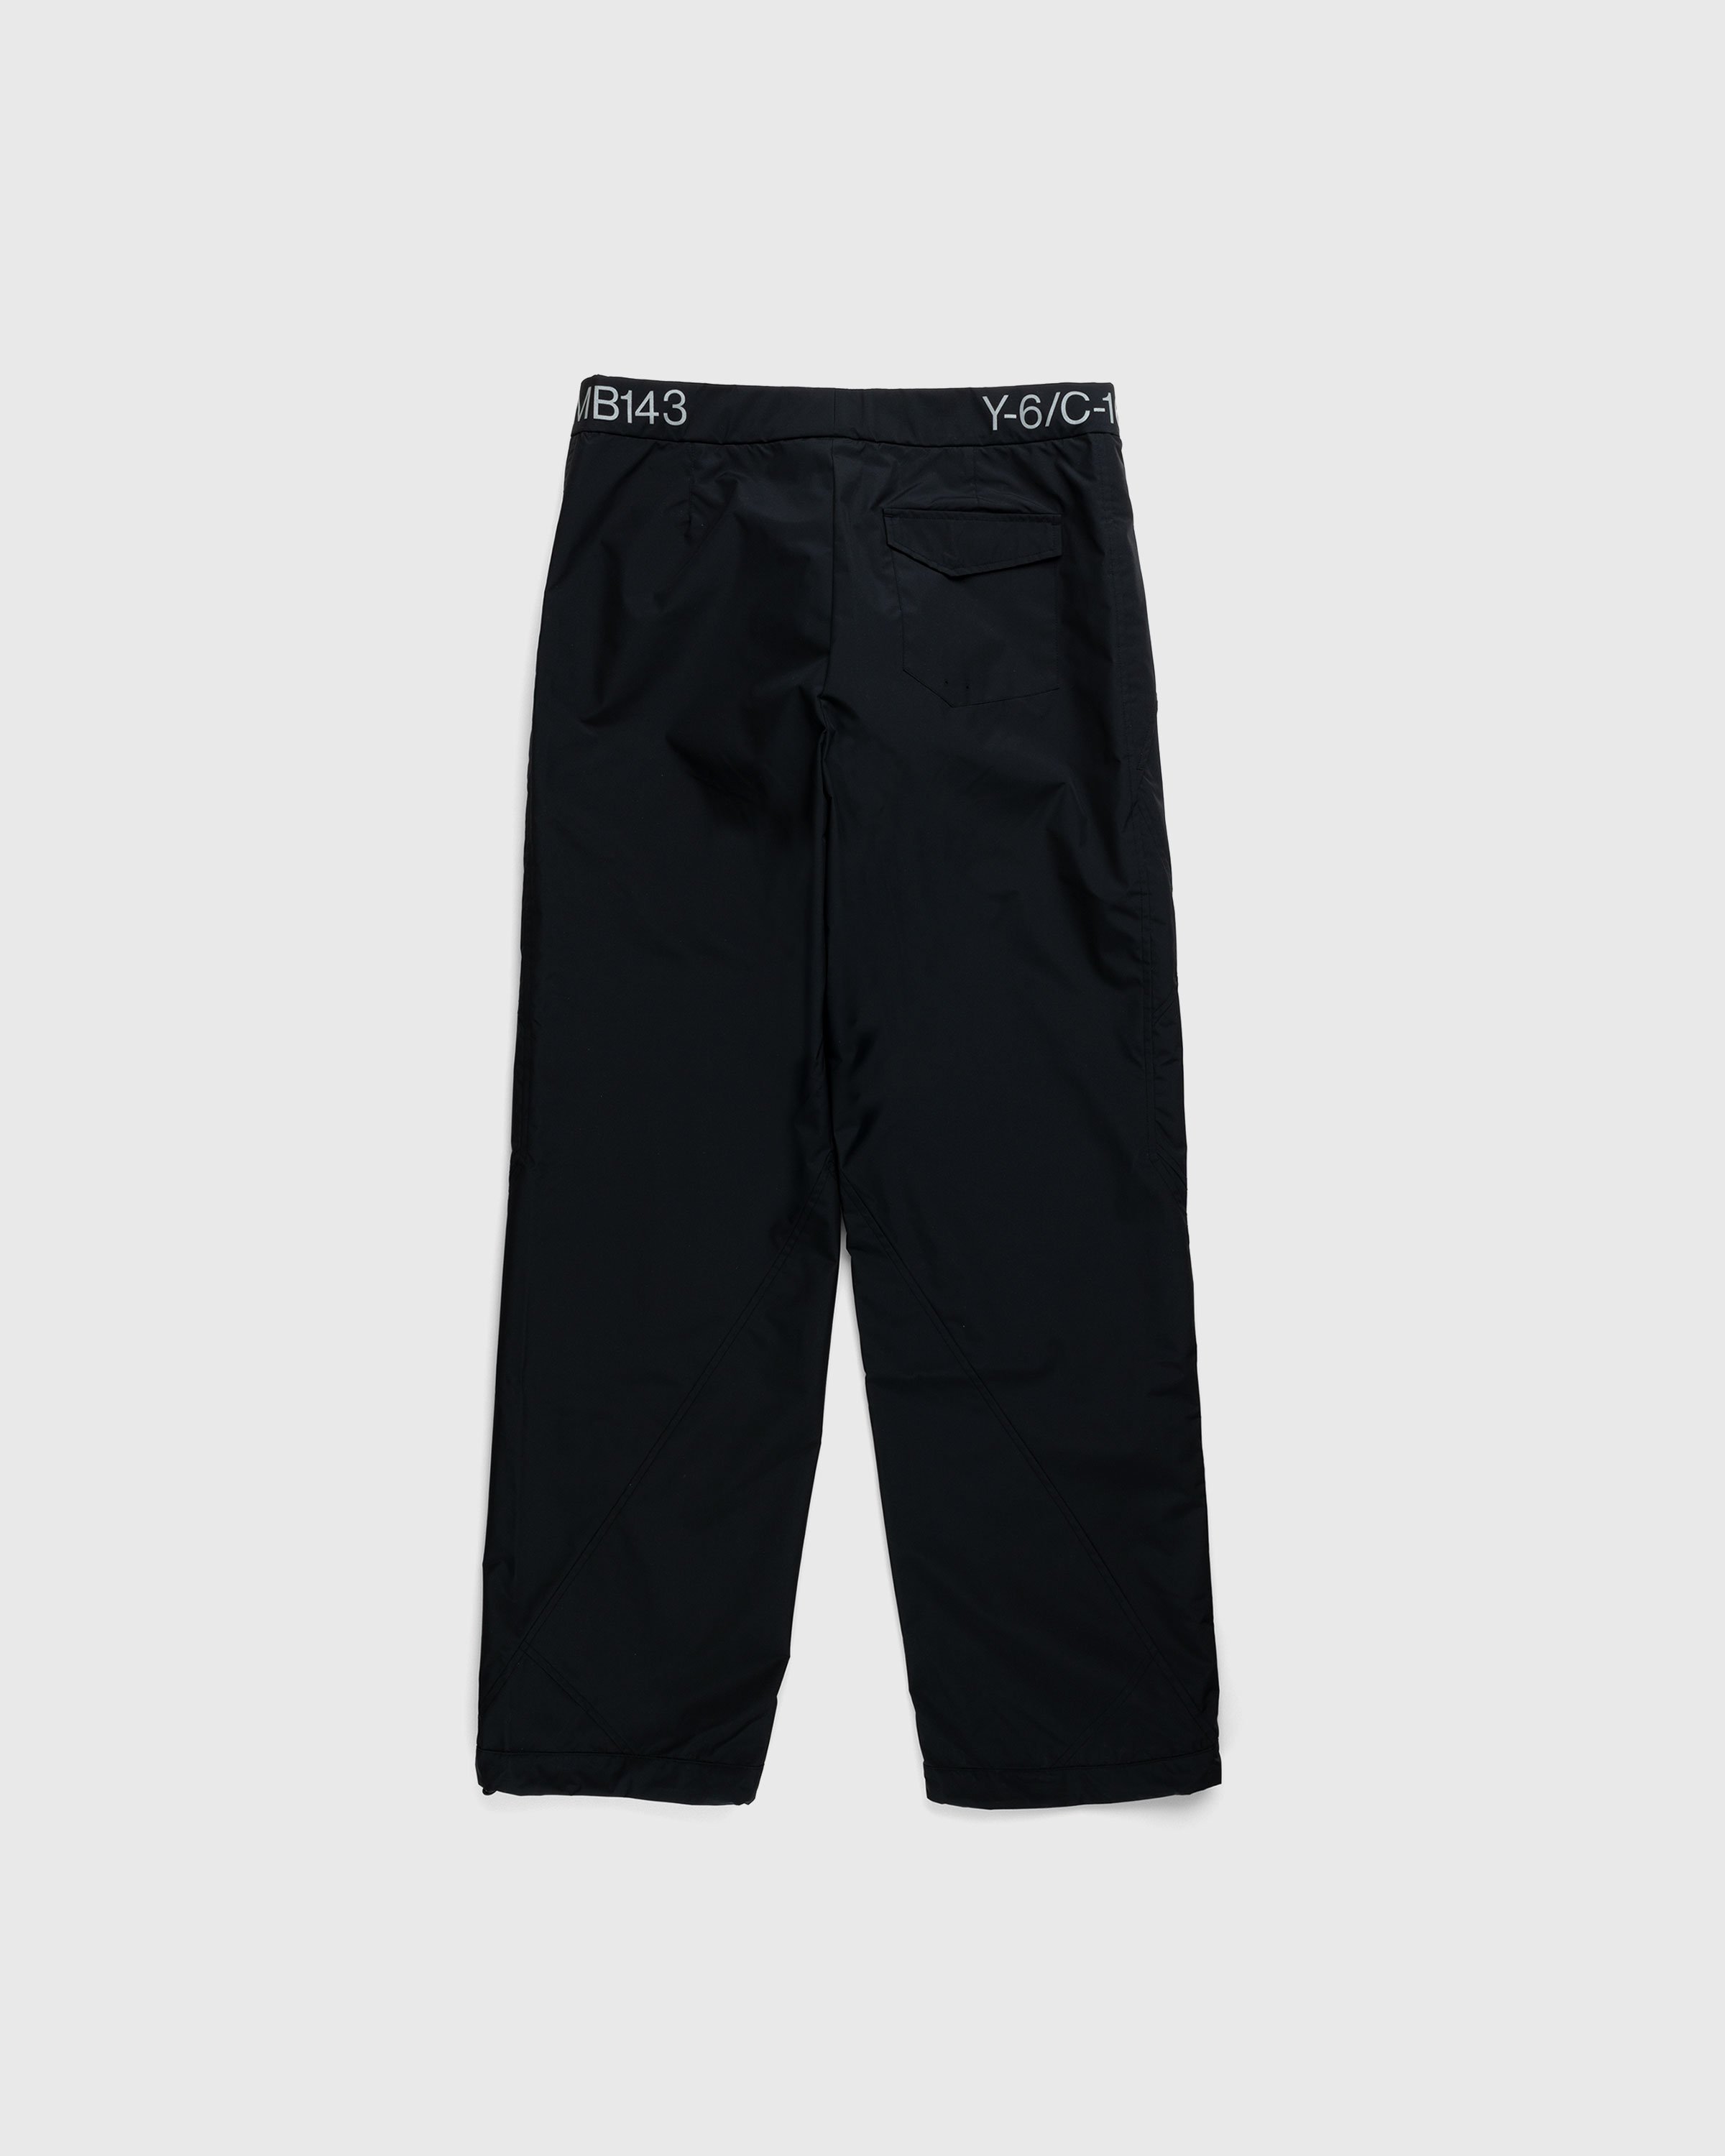 A-Cold-Wall* - Nephin Storm Pants Black - Clothing - Black - Image 2